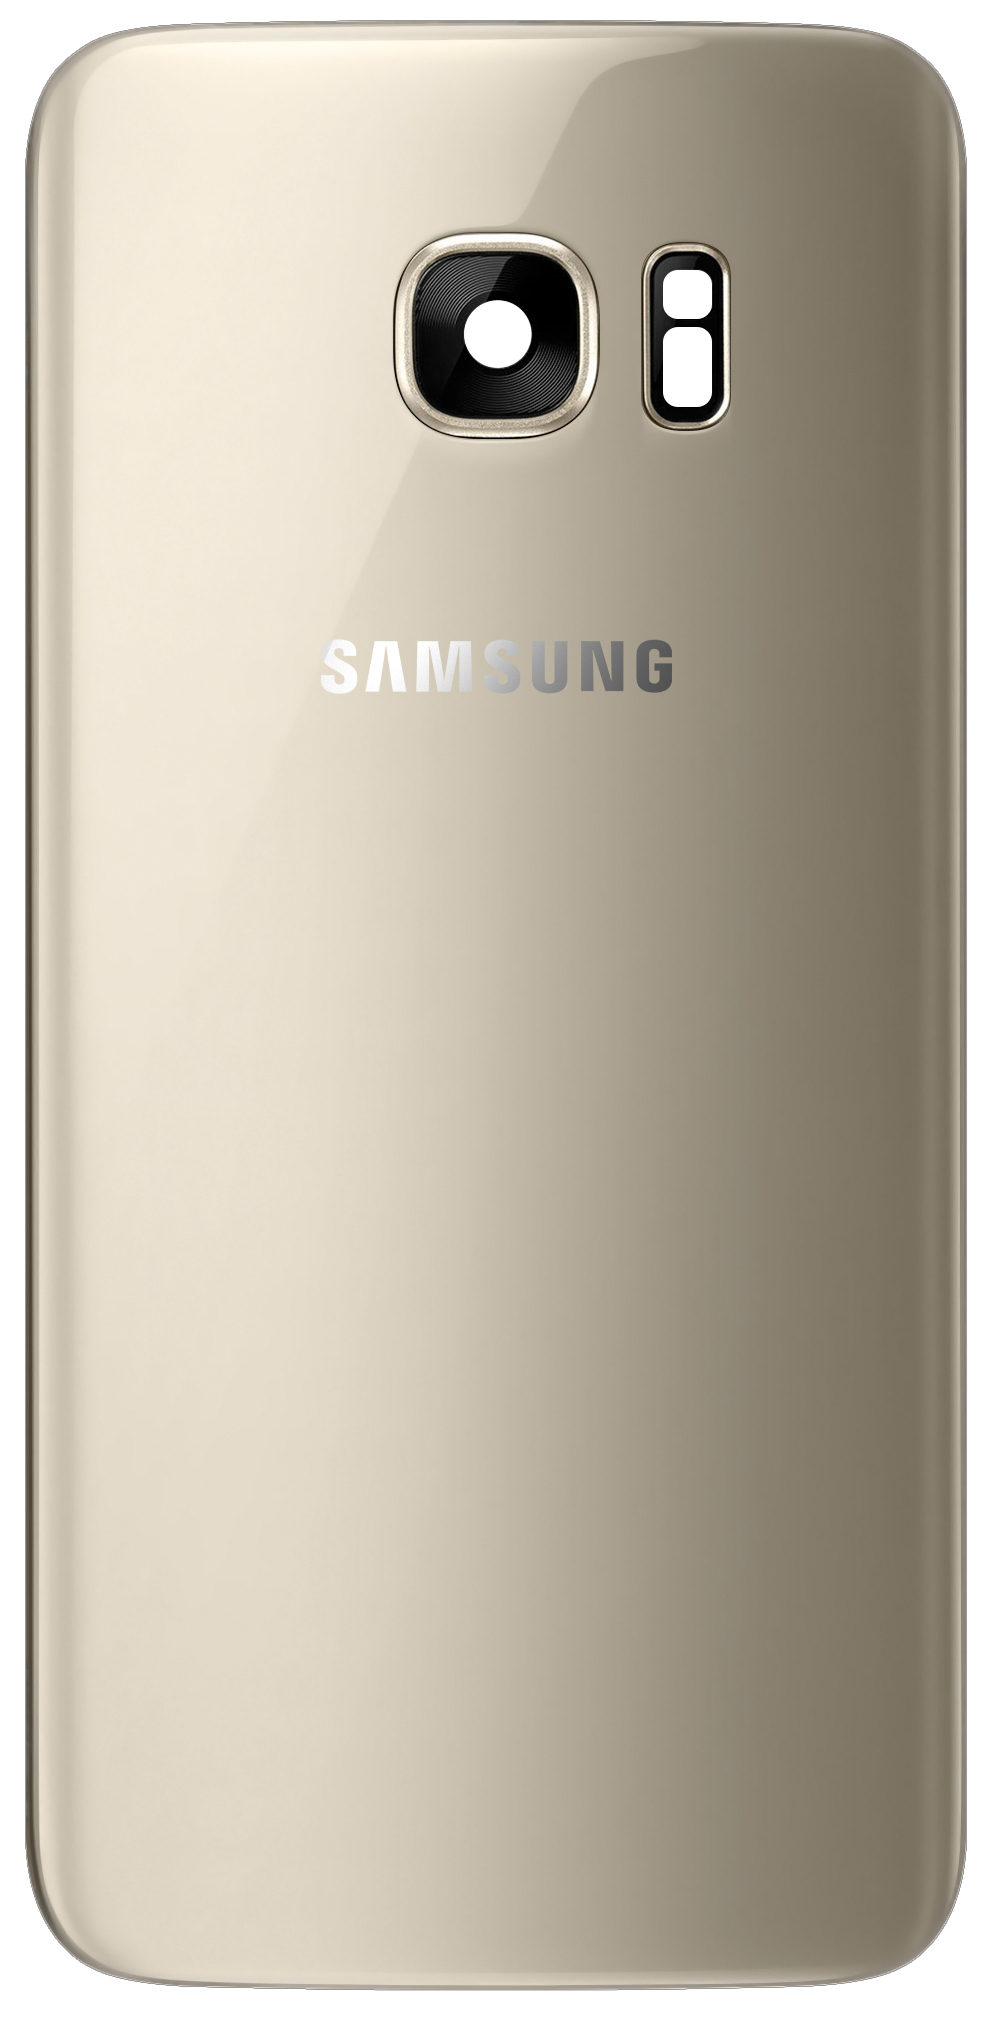 battery-cover-for-samsung-galaxy-s7-g930-2C-gold-platinum